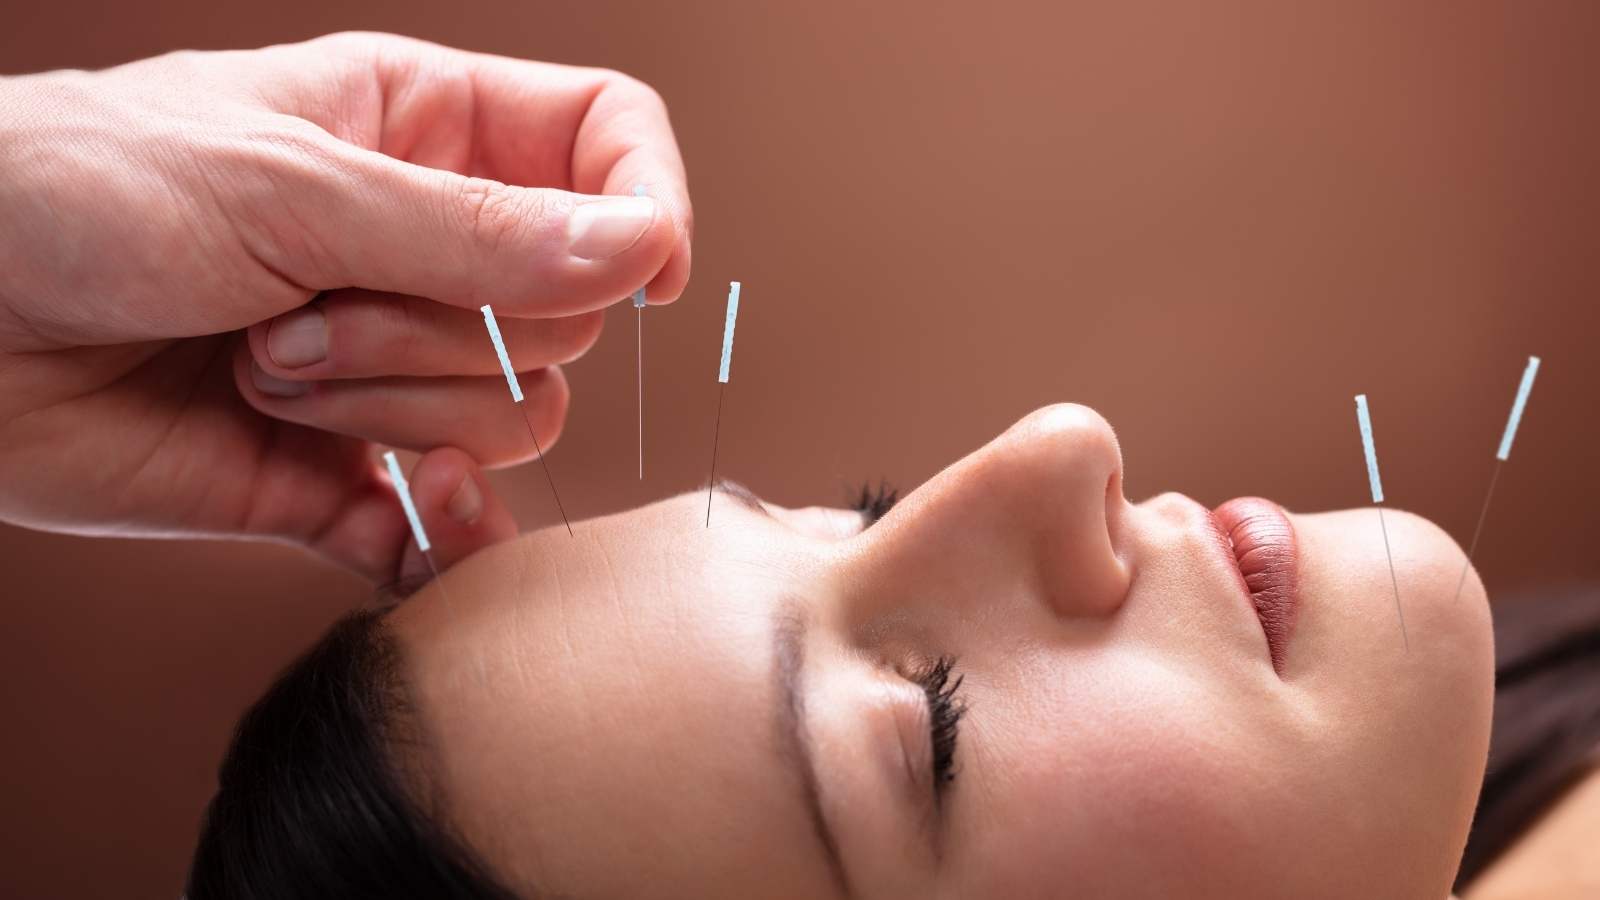 Facial acupuncture needles